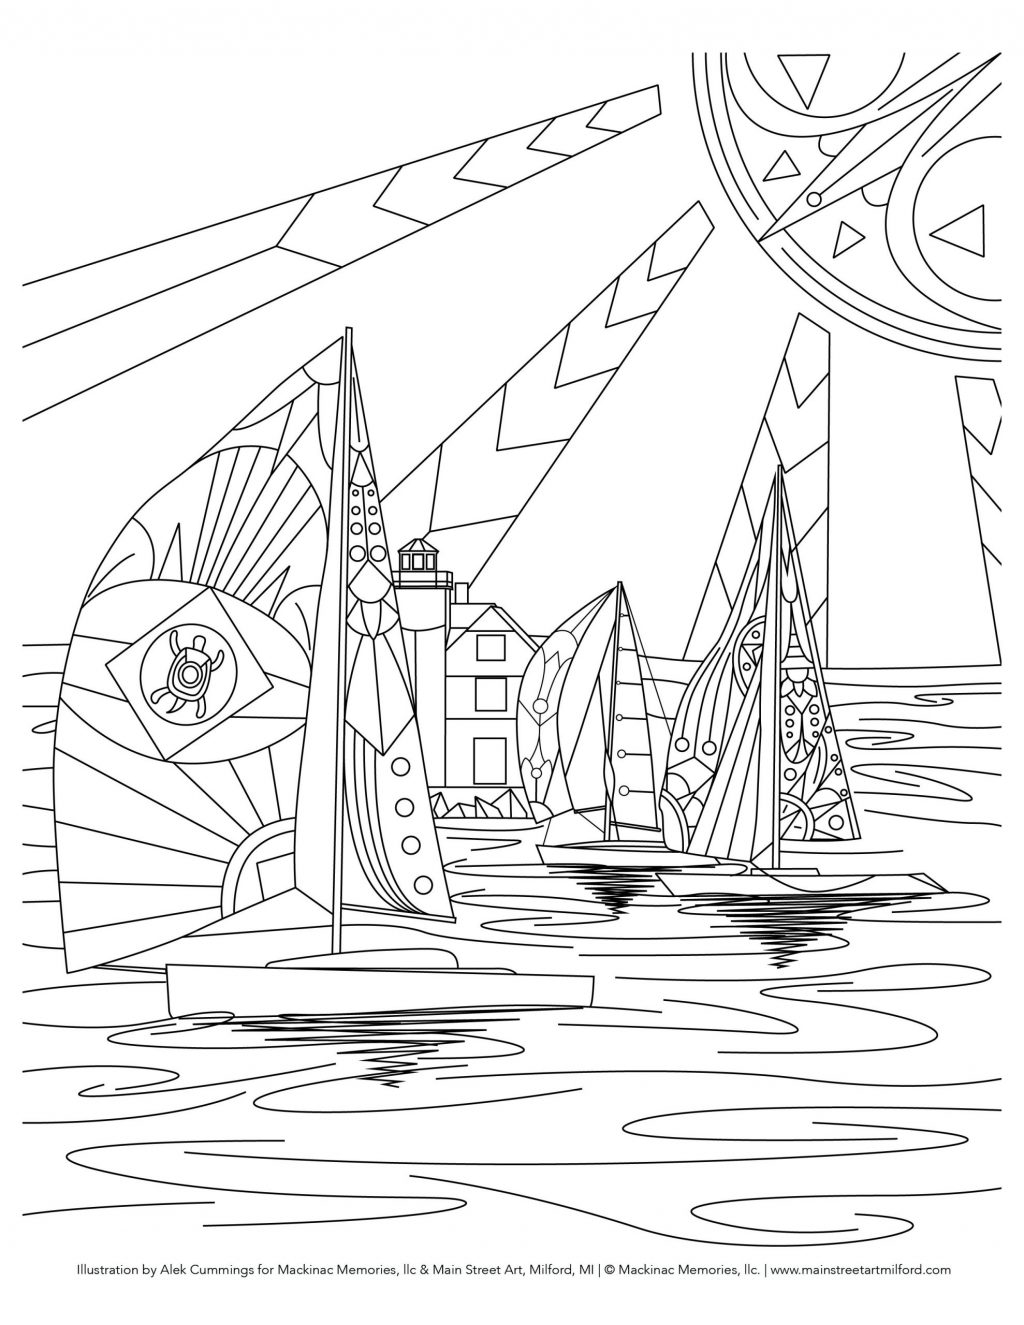 Kitchen Cabinet : Sailboat Coloring Page Sailboat Coloring Page To Print  Free‚ Sailboat Coloring Page Preschool‚ Sailboat Coloring Page Pattern Of A  Diaper Bag and Kitchen Cabinets